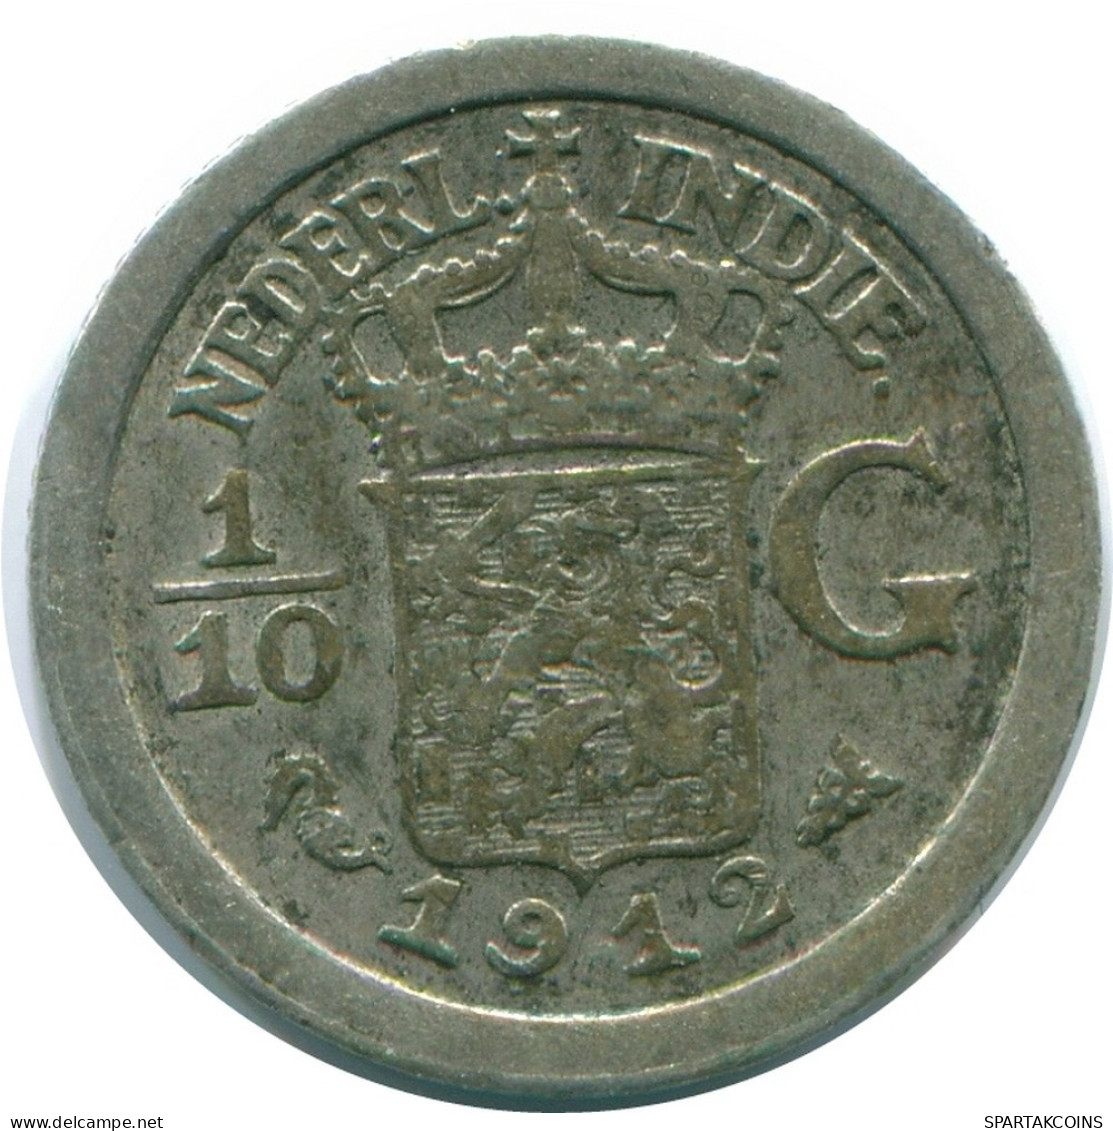 1/10 GULDEN 1912 NETHERLANDS EAST INDIES SILVER Colonial Coin #NL13259.3.U.A - Indes Neerlandesas